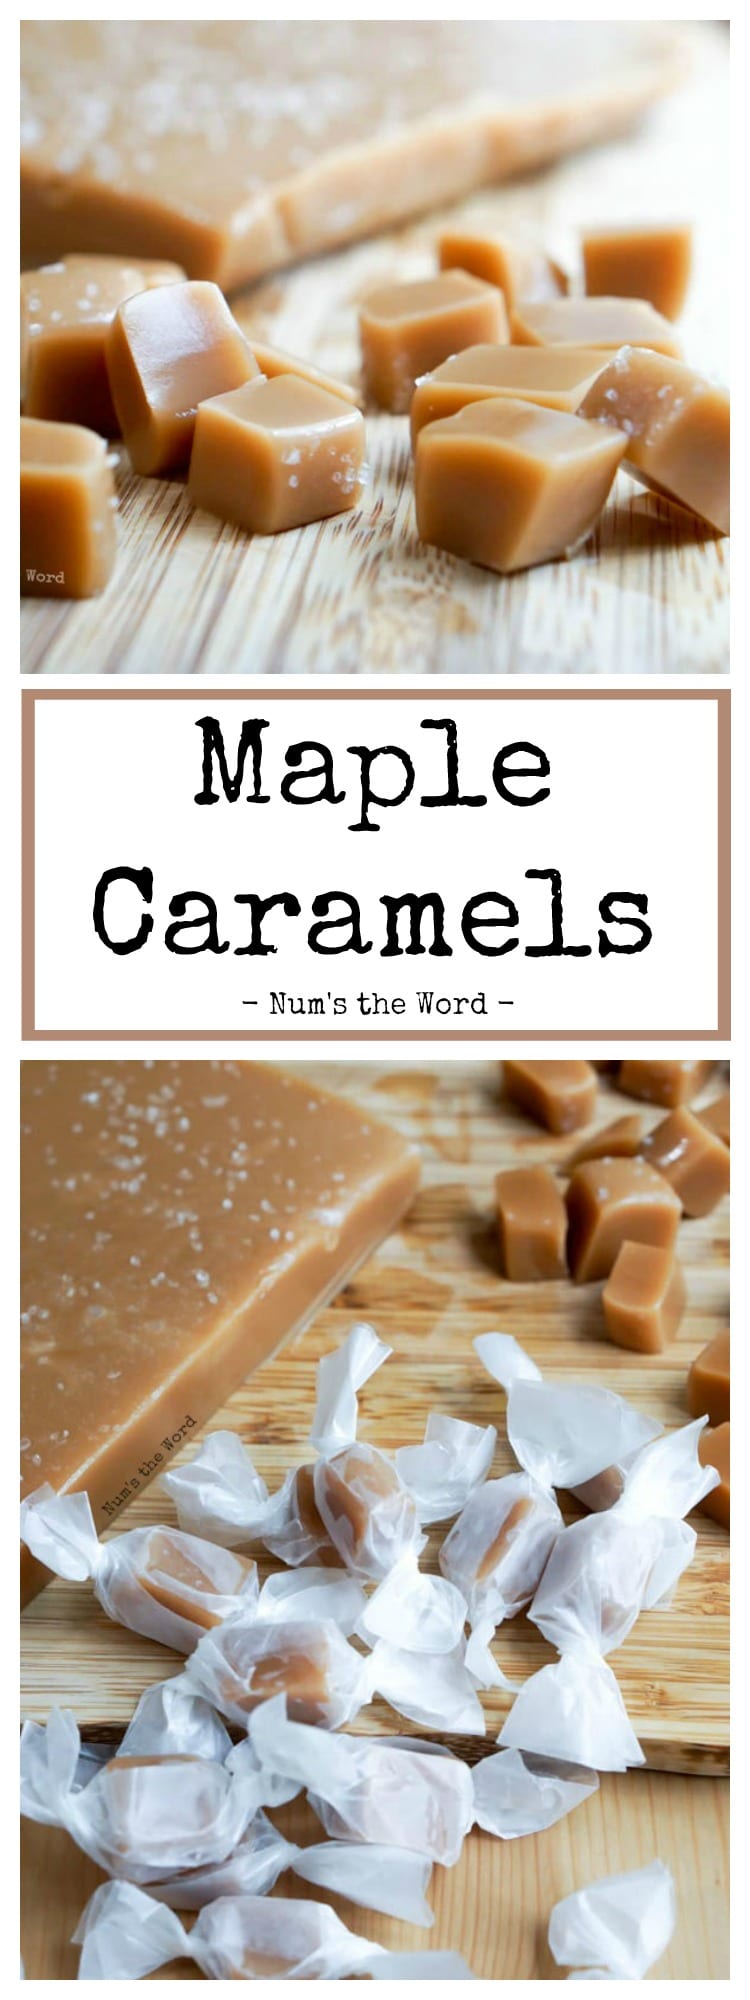 6 Ingredient Old Fashioned Maple Caramel Candy - Num's the Word